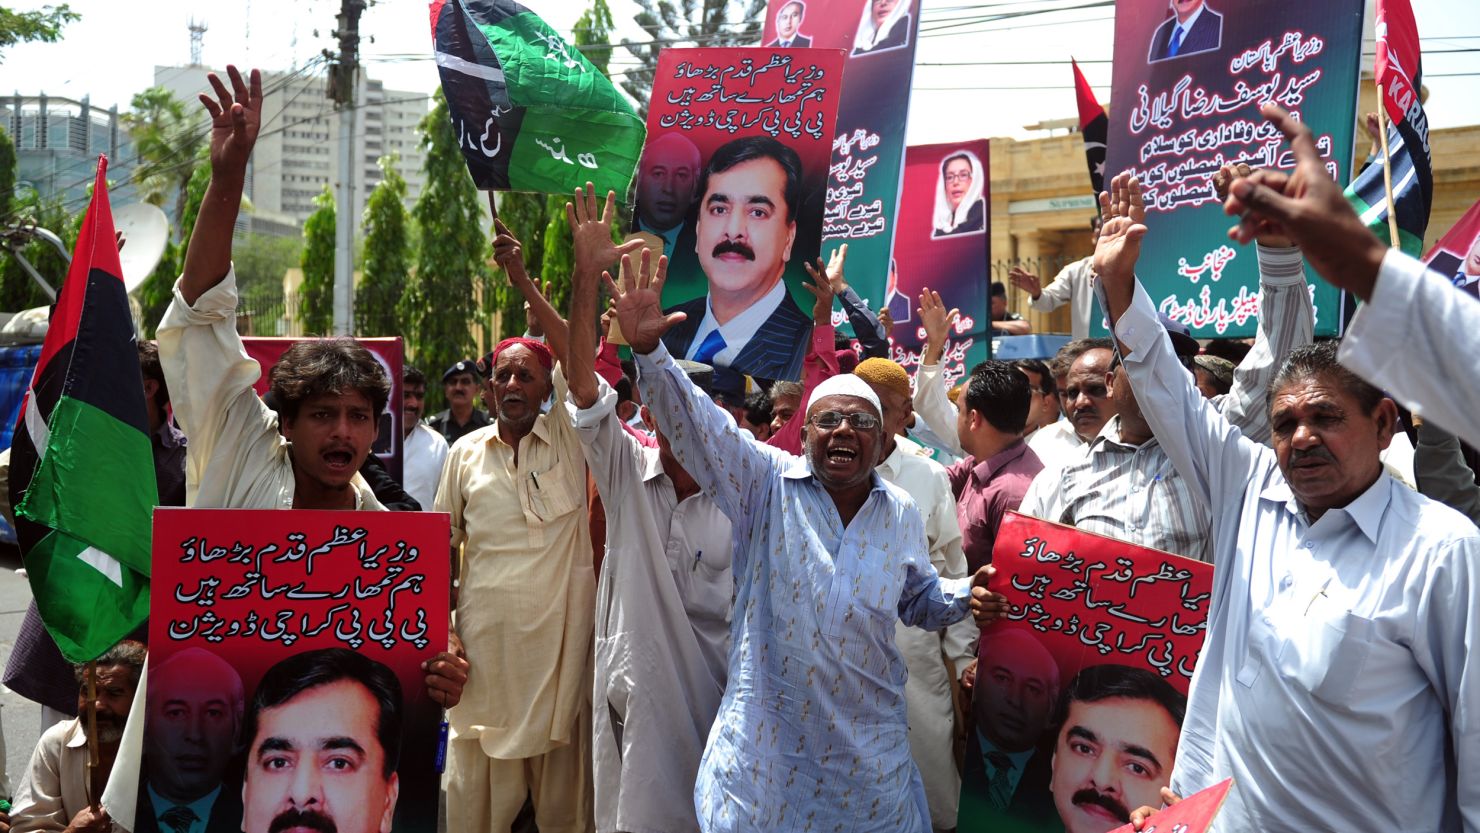 Supporters of the ruling Pakistan Peoples Party (PPP) protest the verdict against Gilani.